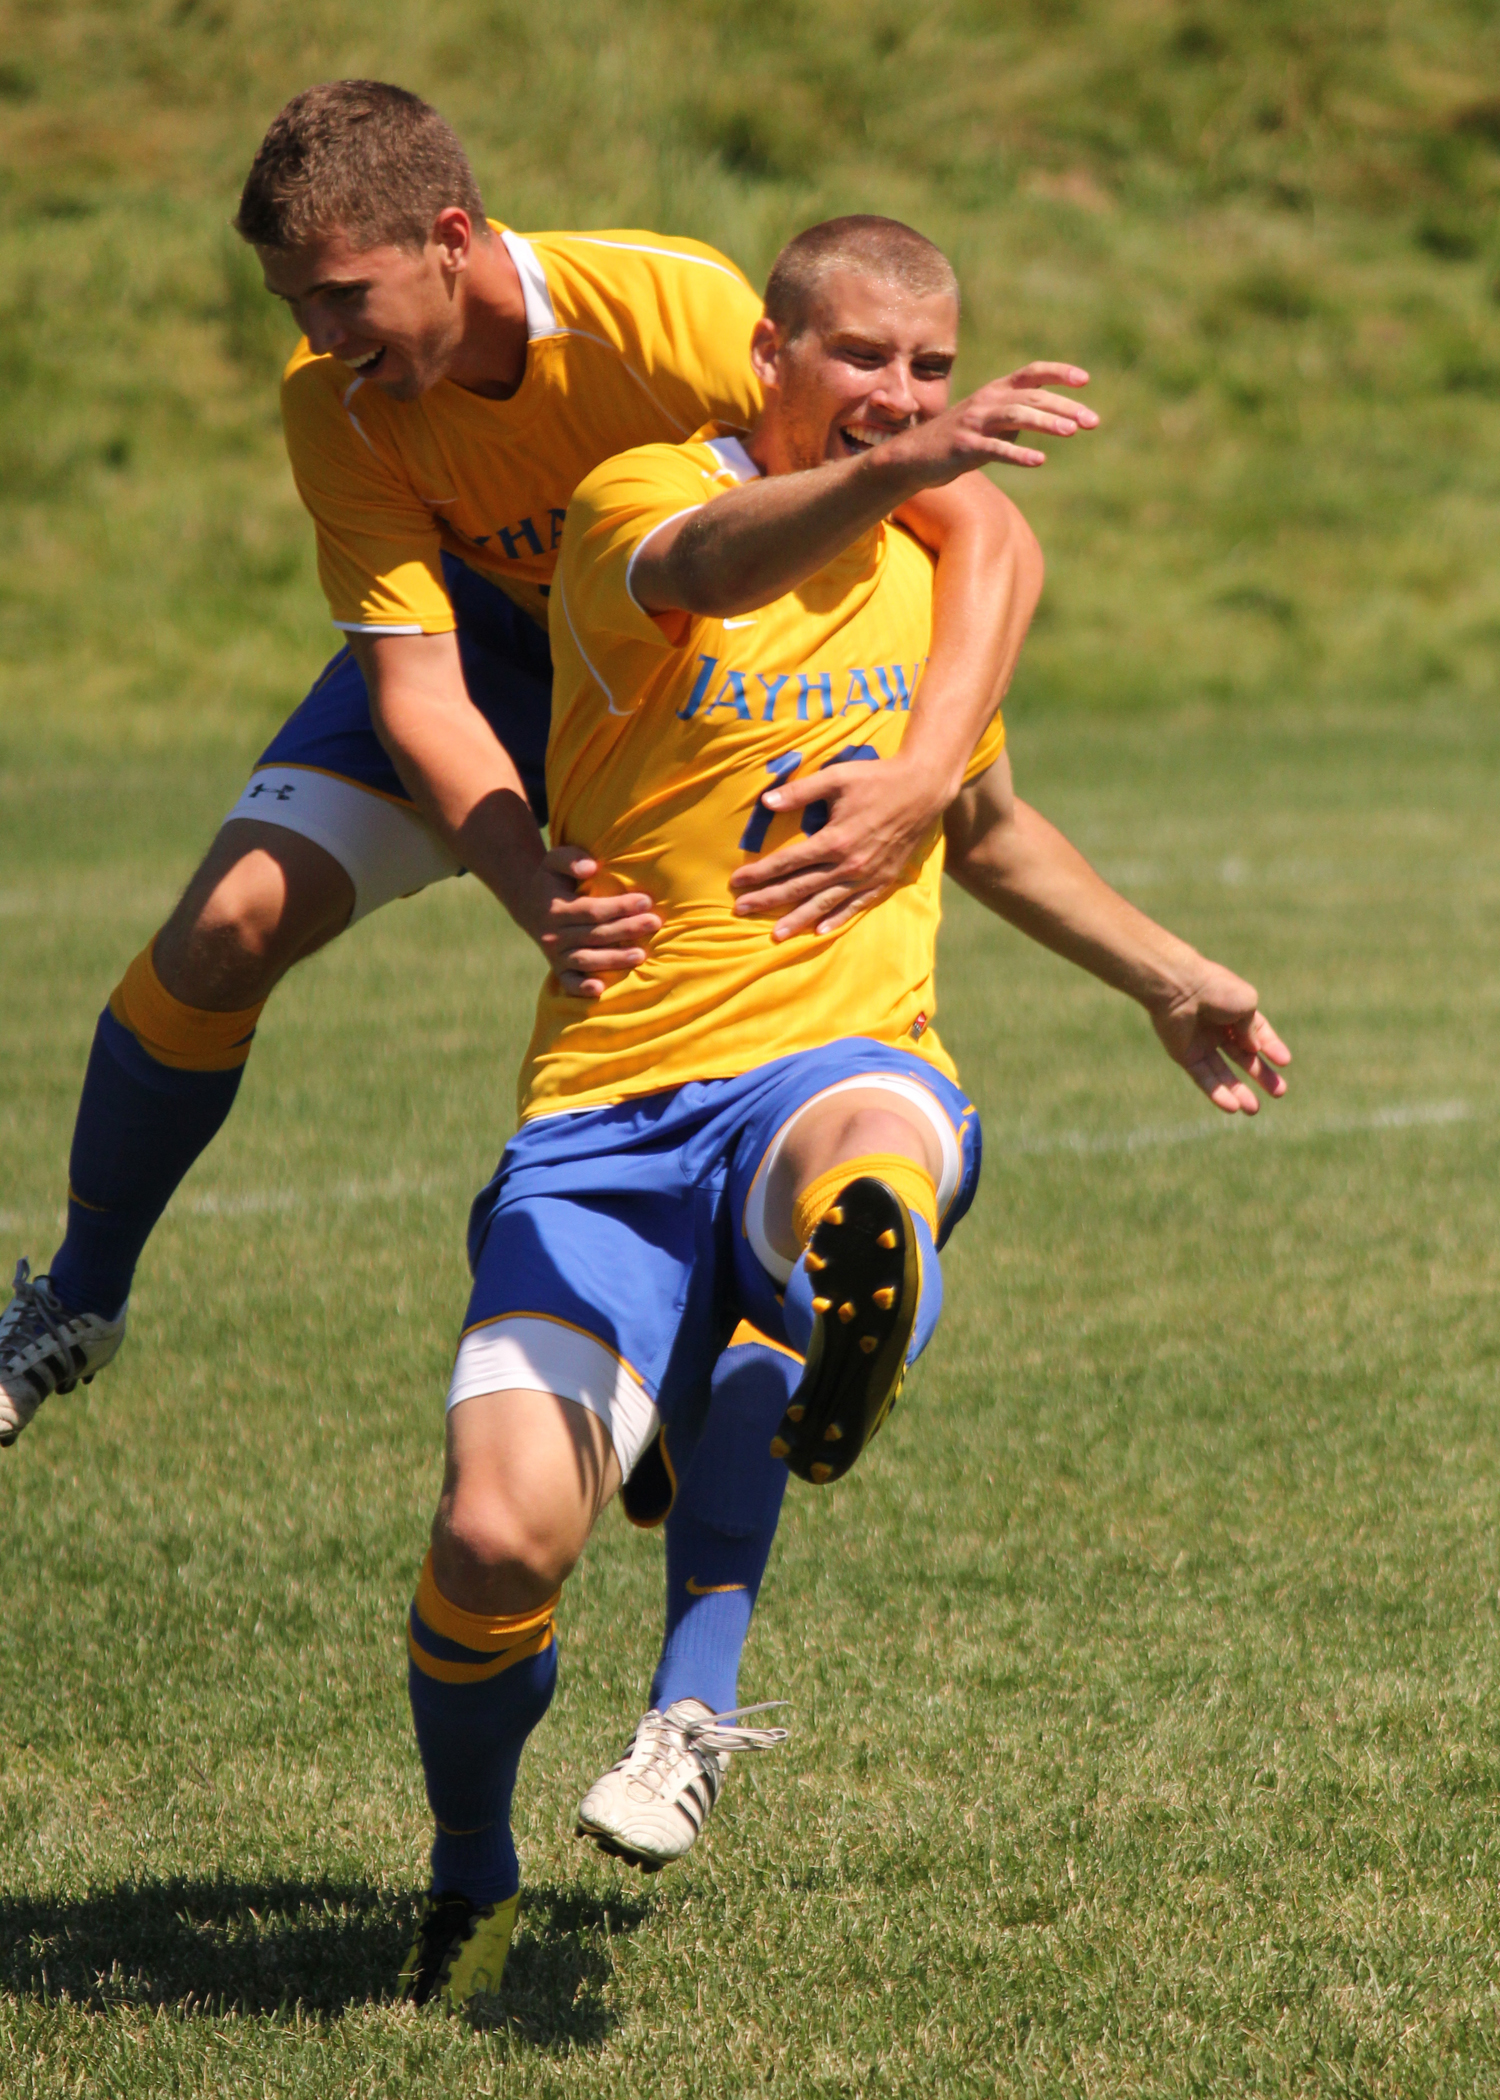 Nathan Schmitt celebrates after scoring the first goal in MCC history.